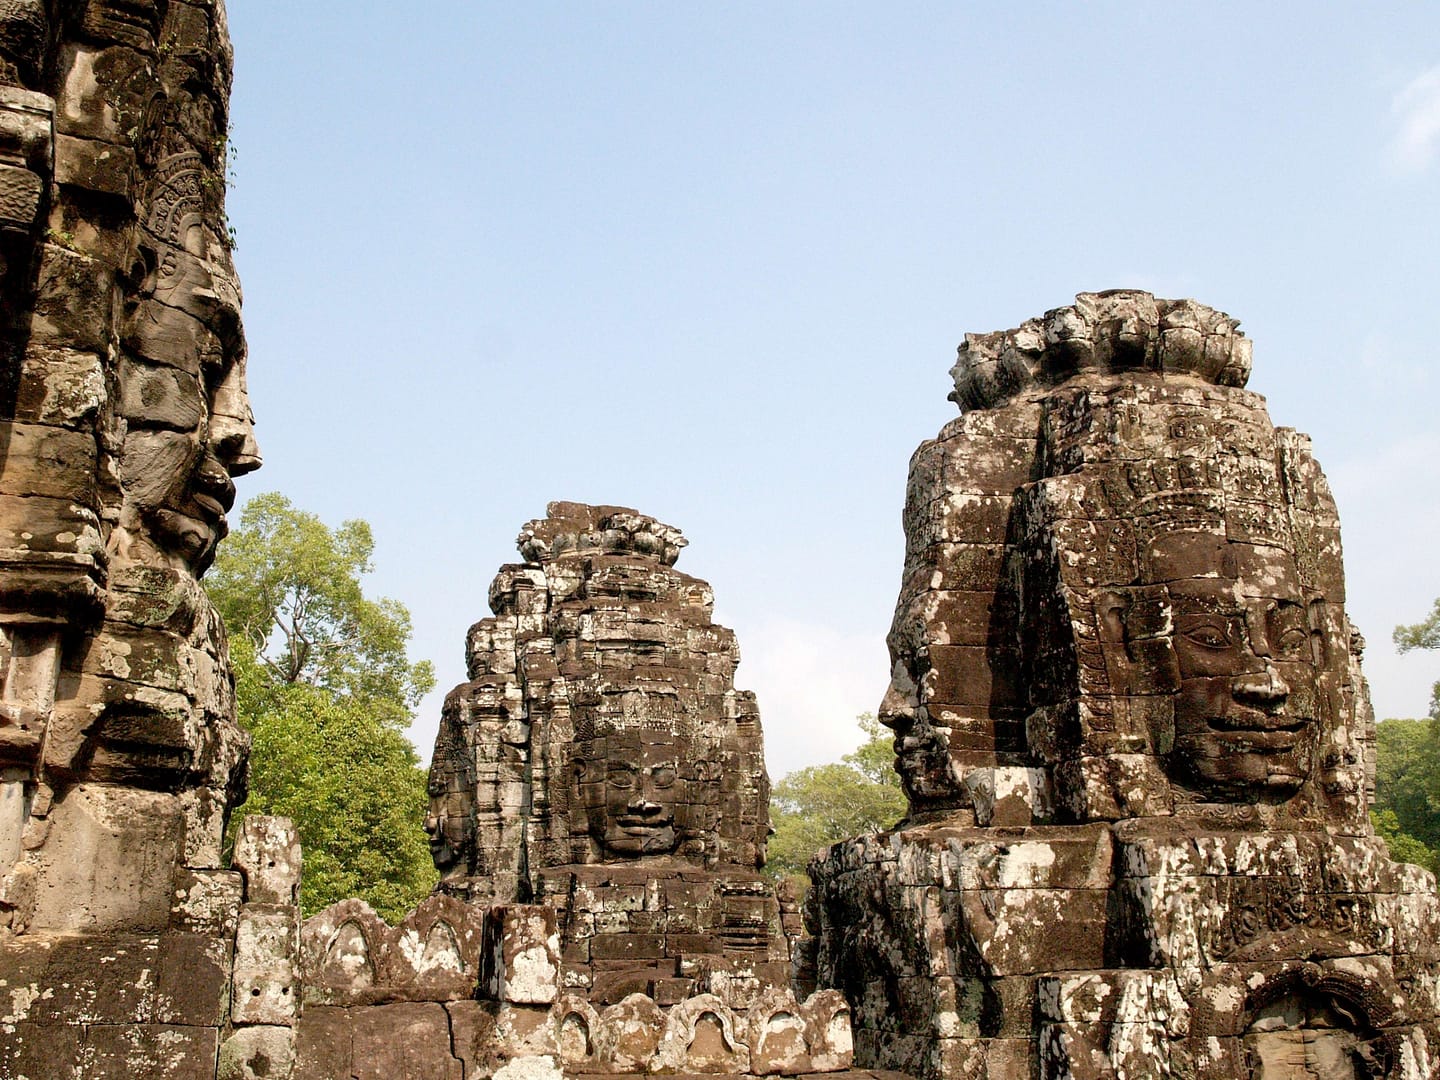 These 10 ancient archeological sites are some of the finest in all of Asia